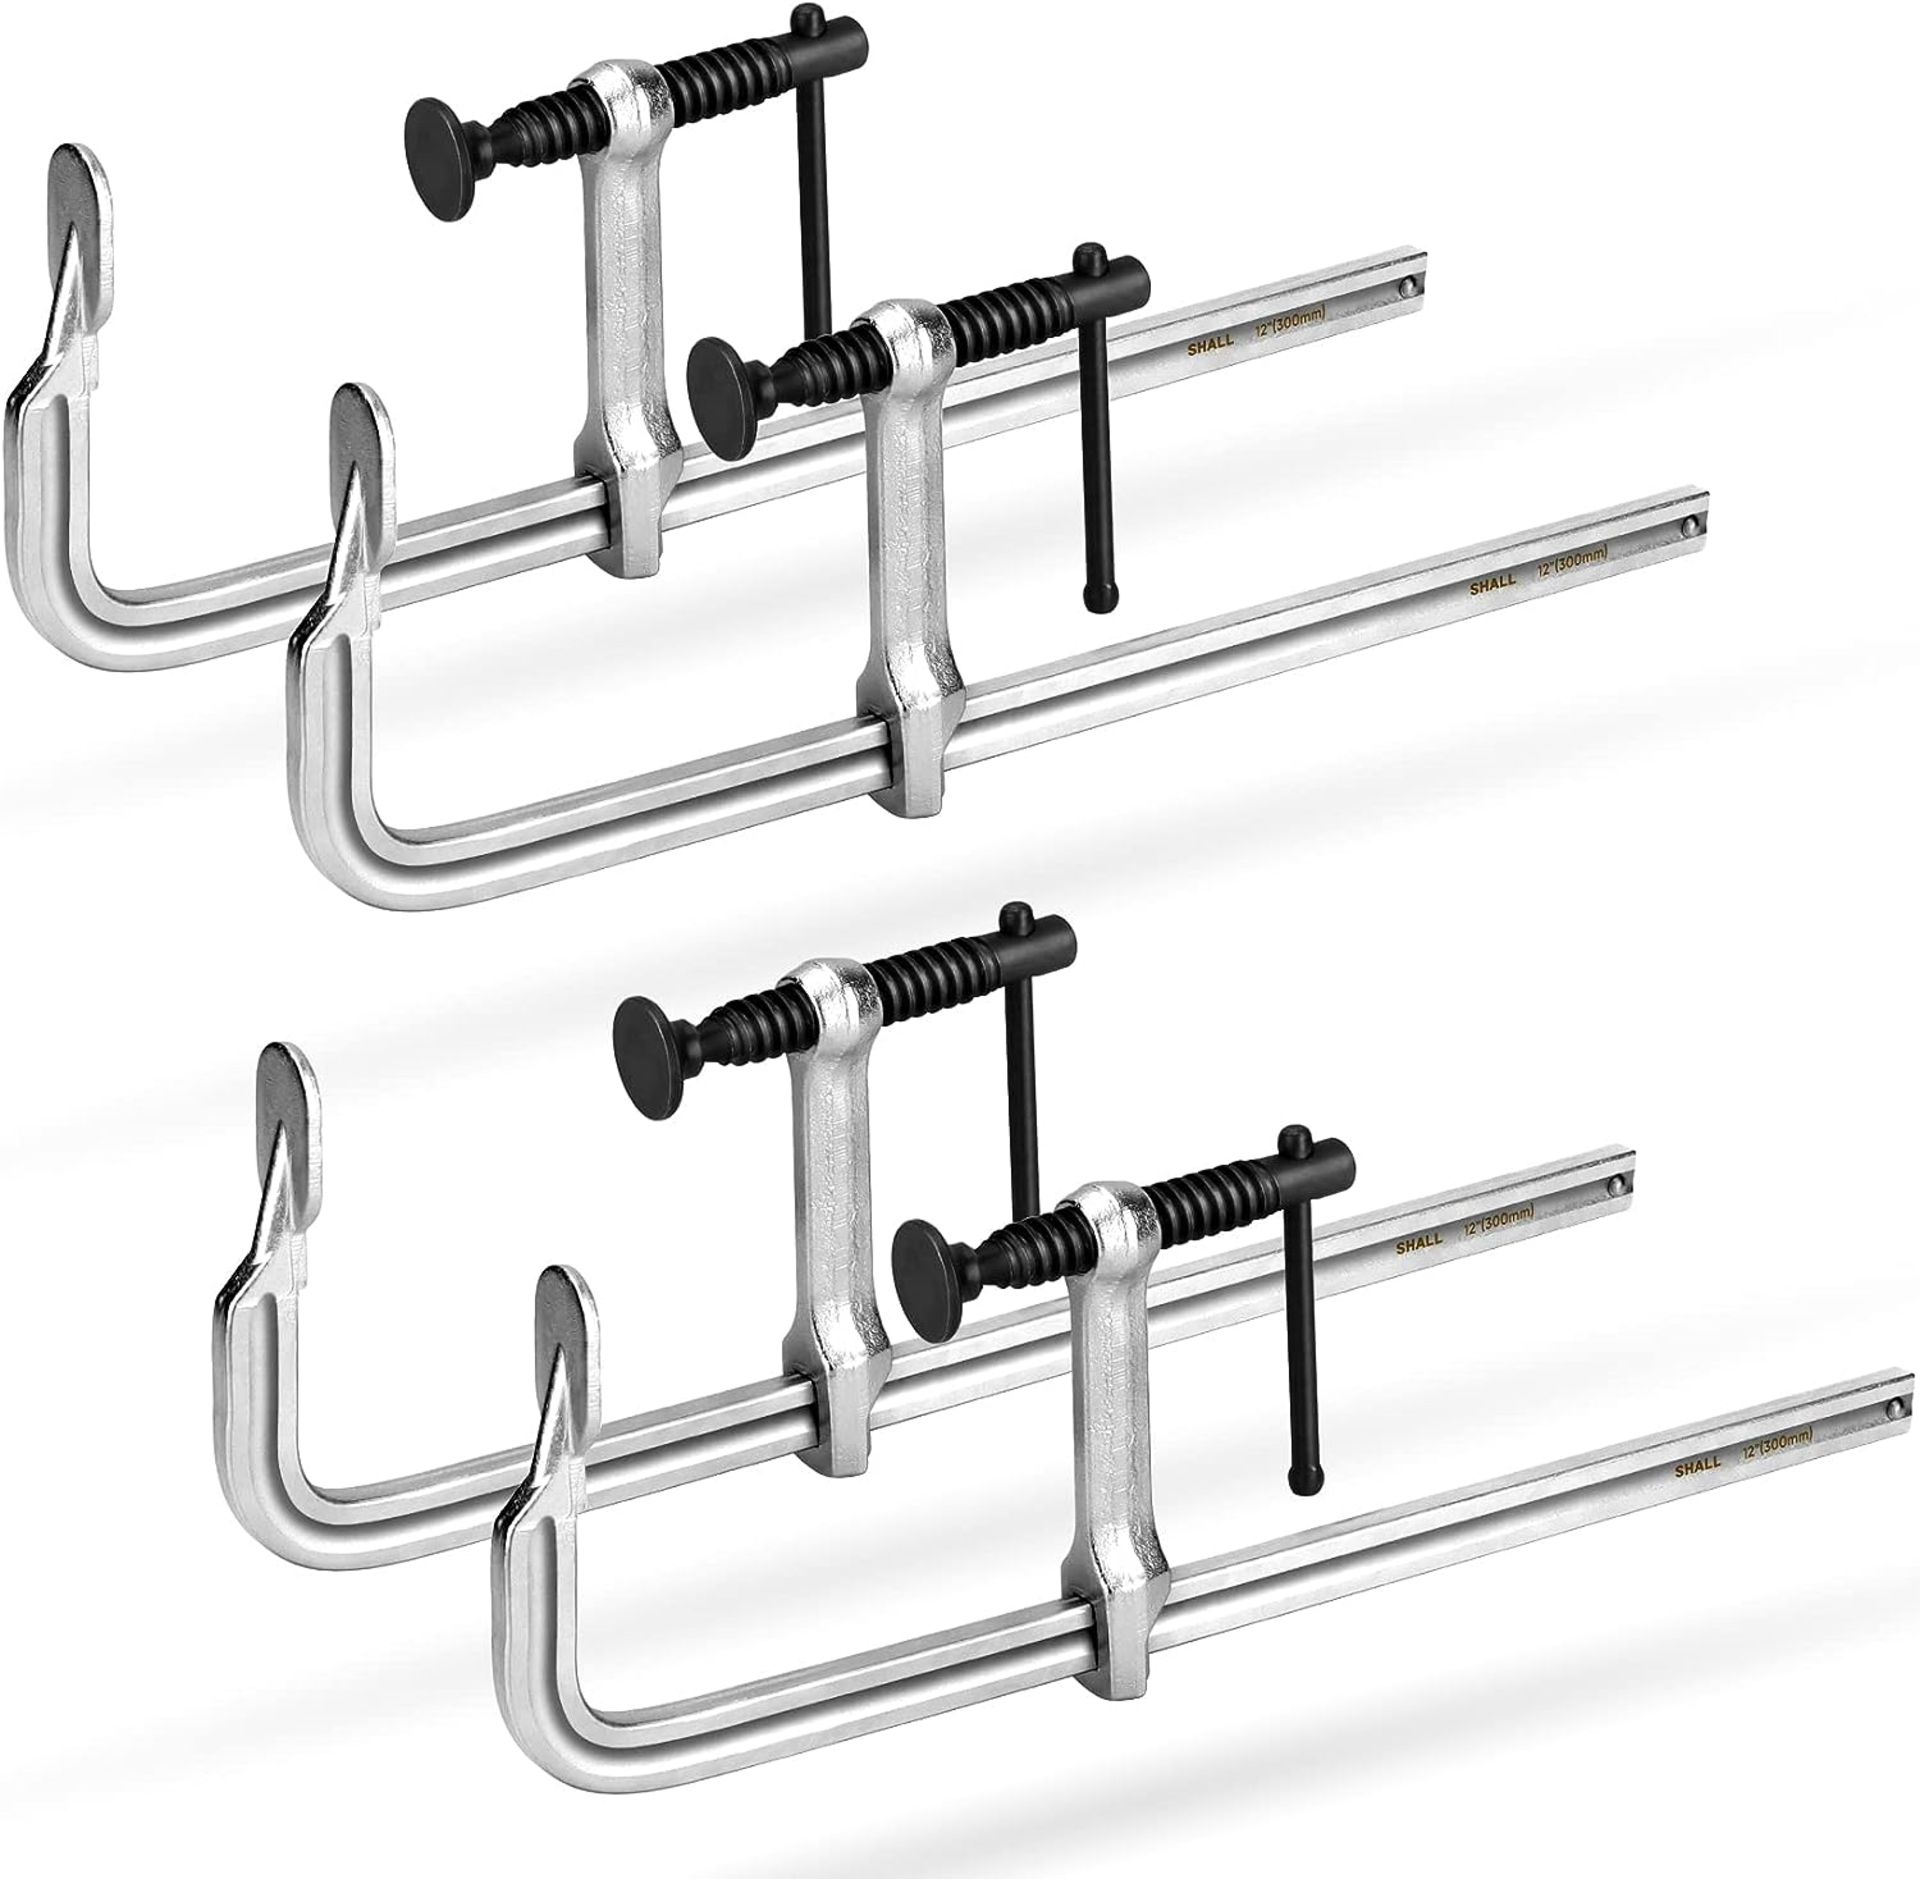 RRP £36.99 SHALL 4-Pack Bar Clamps Set, 12-Inch Light-Duty Drop Forged Steel Bar Clamps, Steel F